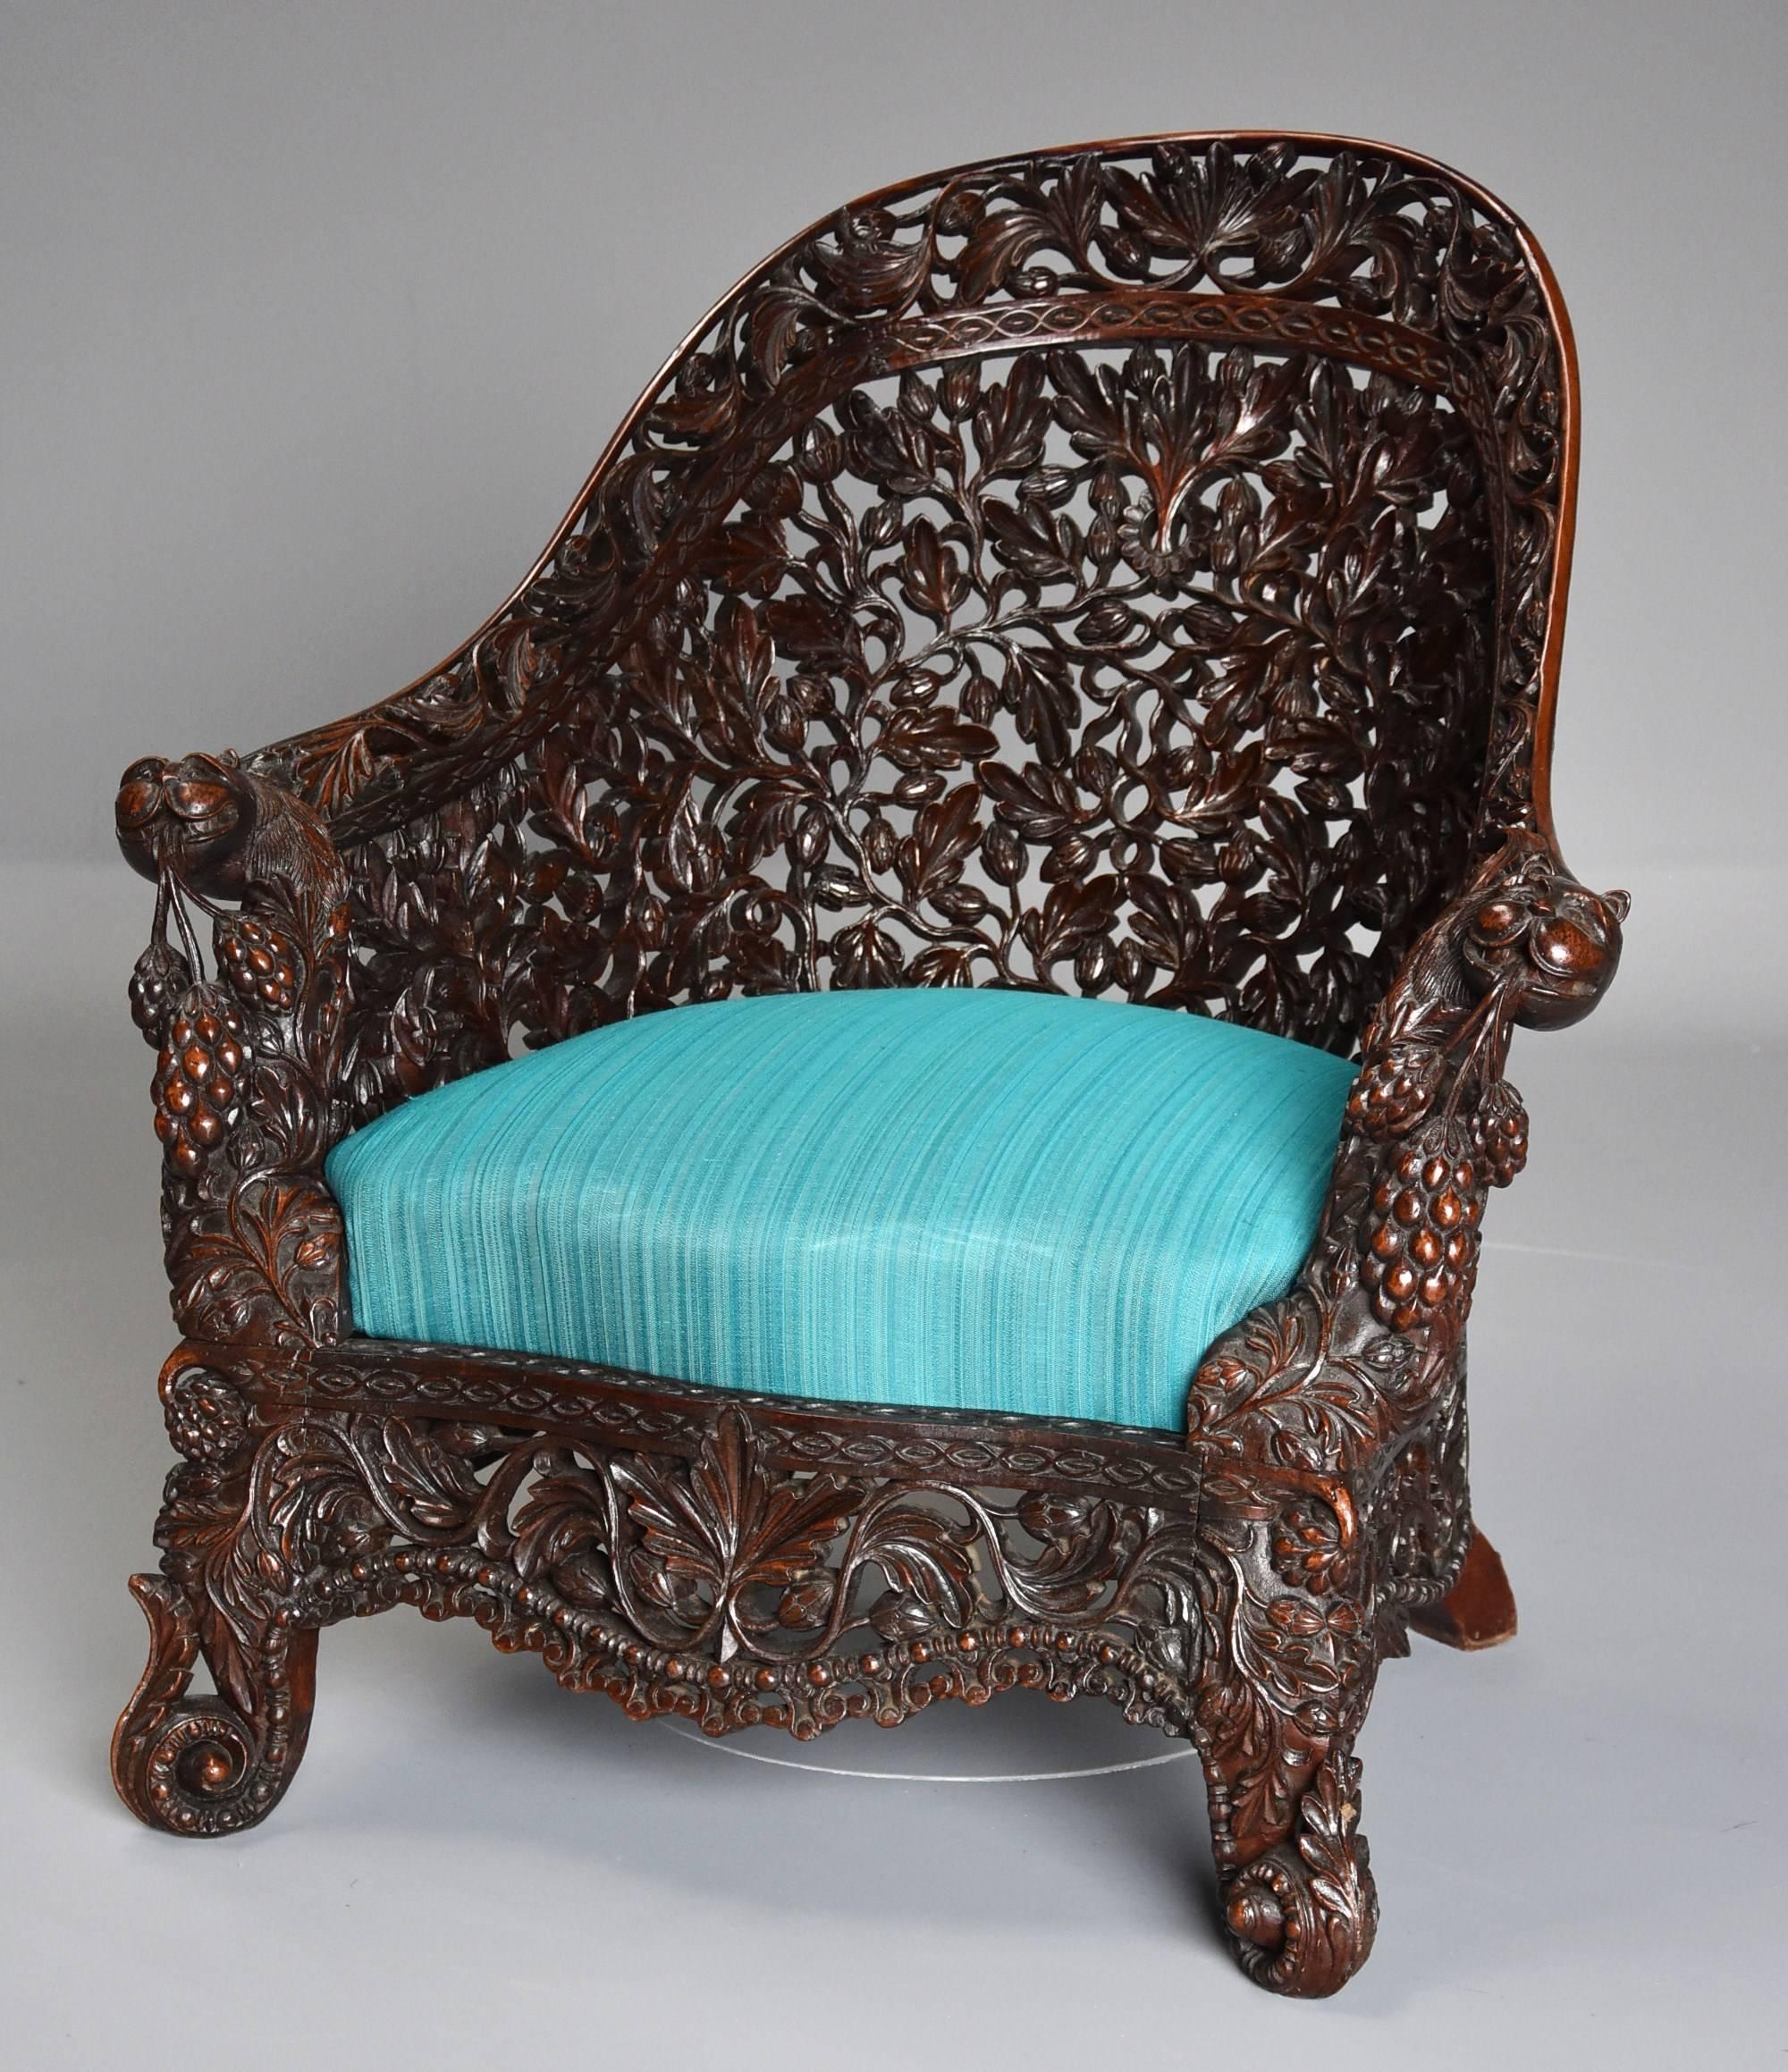 A rare and highly decorative mid-19th century profusely carved blackwood armchair of superb quality from the Bombay area of India.

This chair consists of a profusely carved and pierced arched and shaped back with an outer border depicting